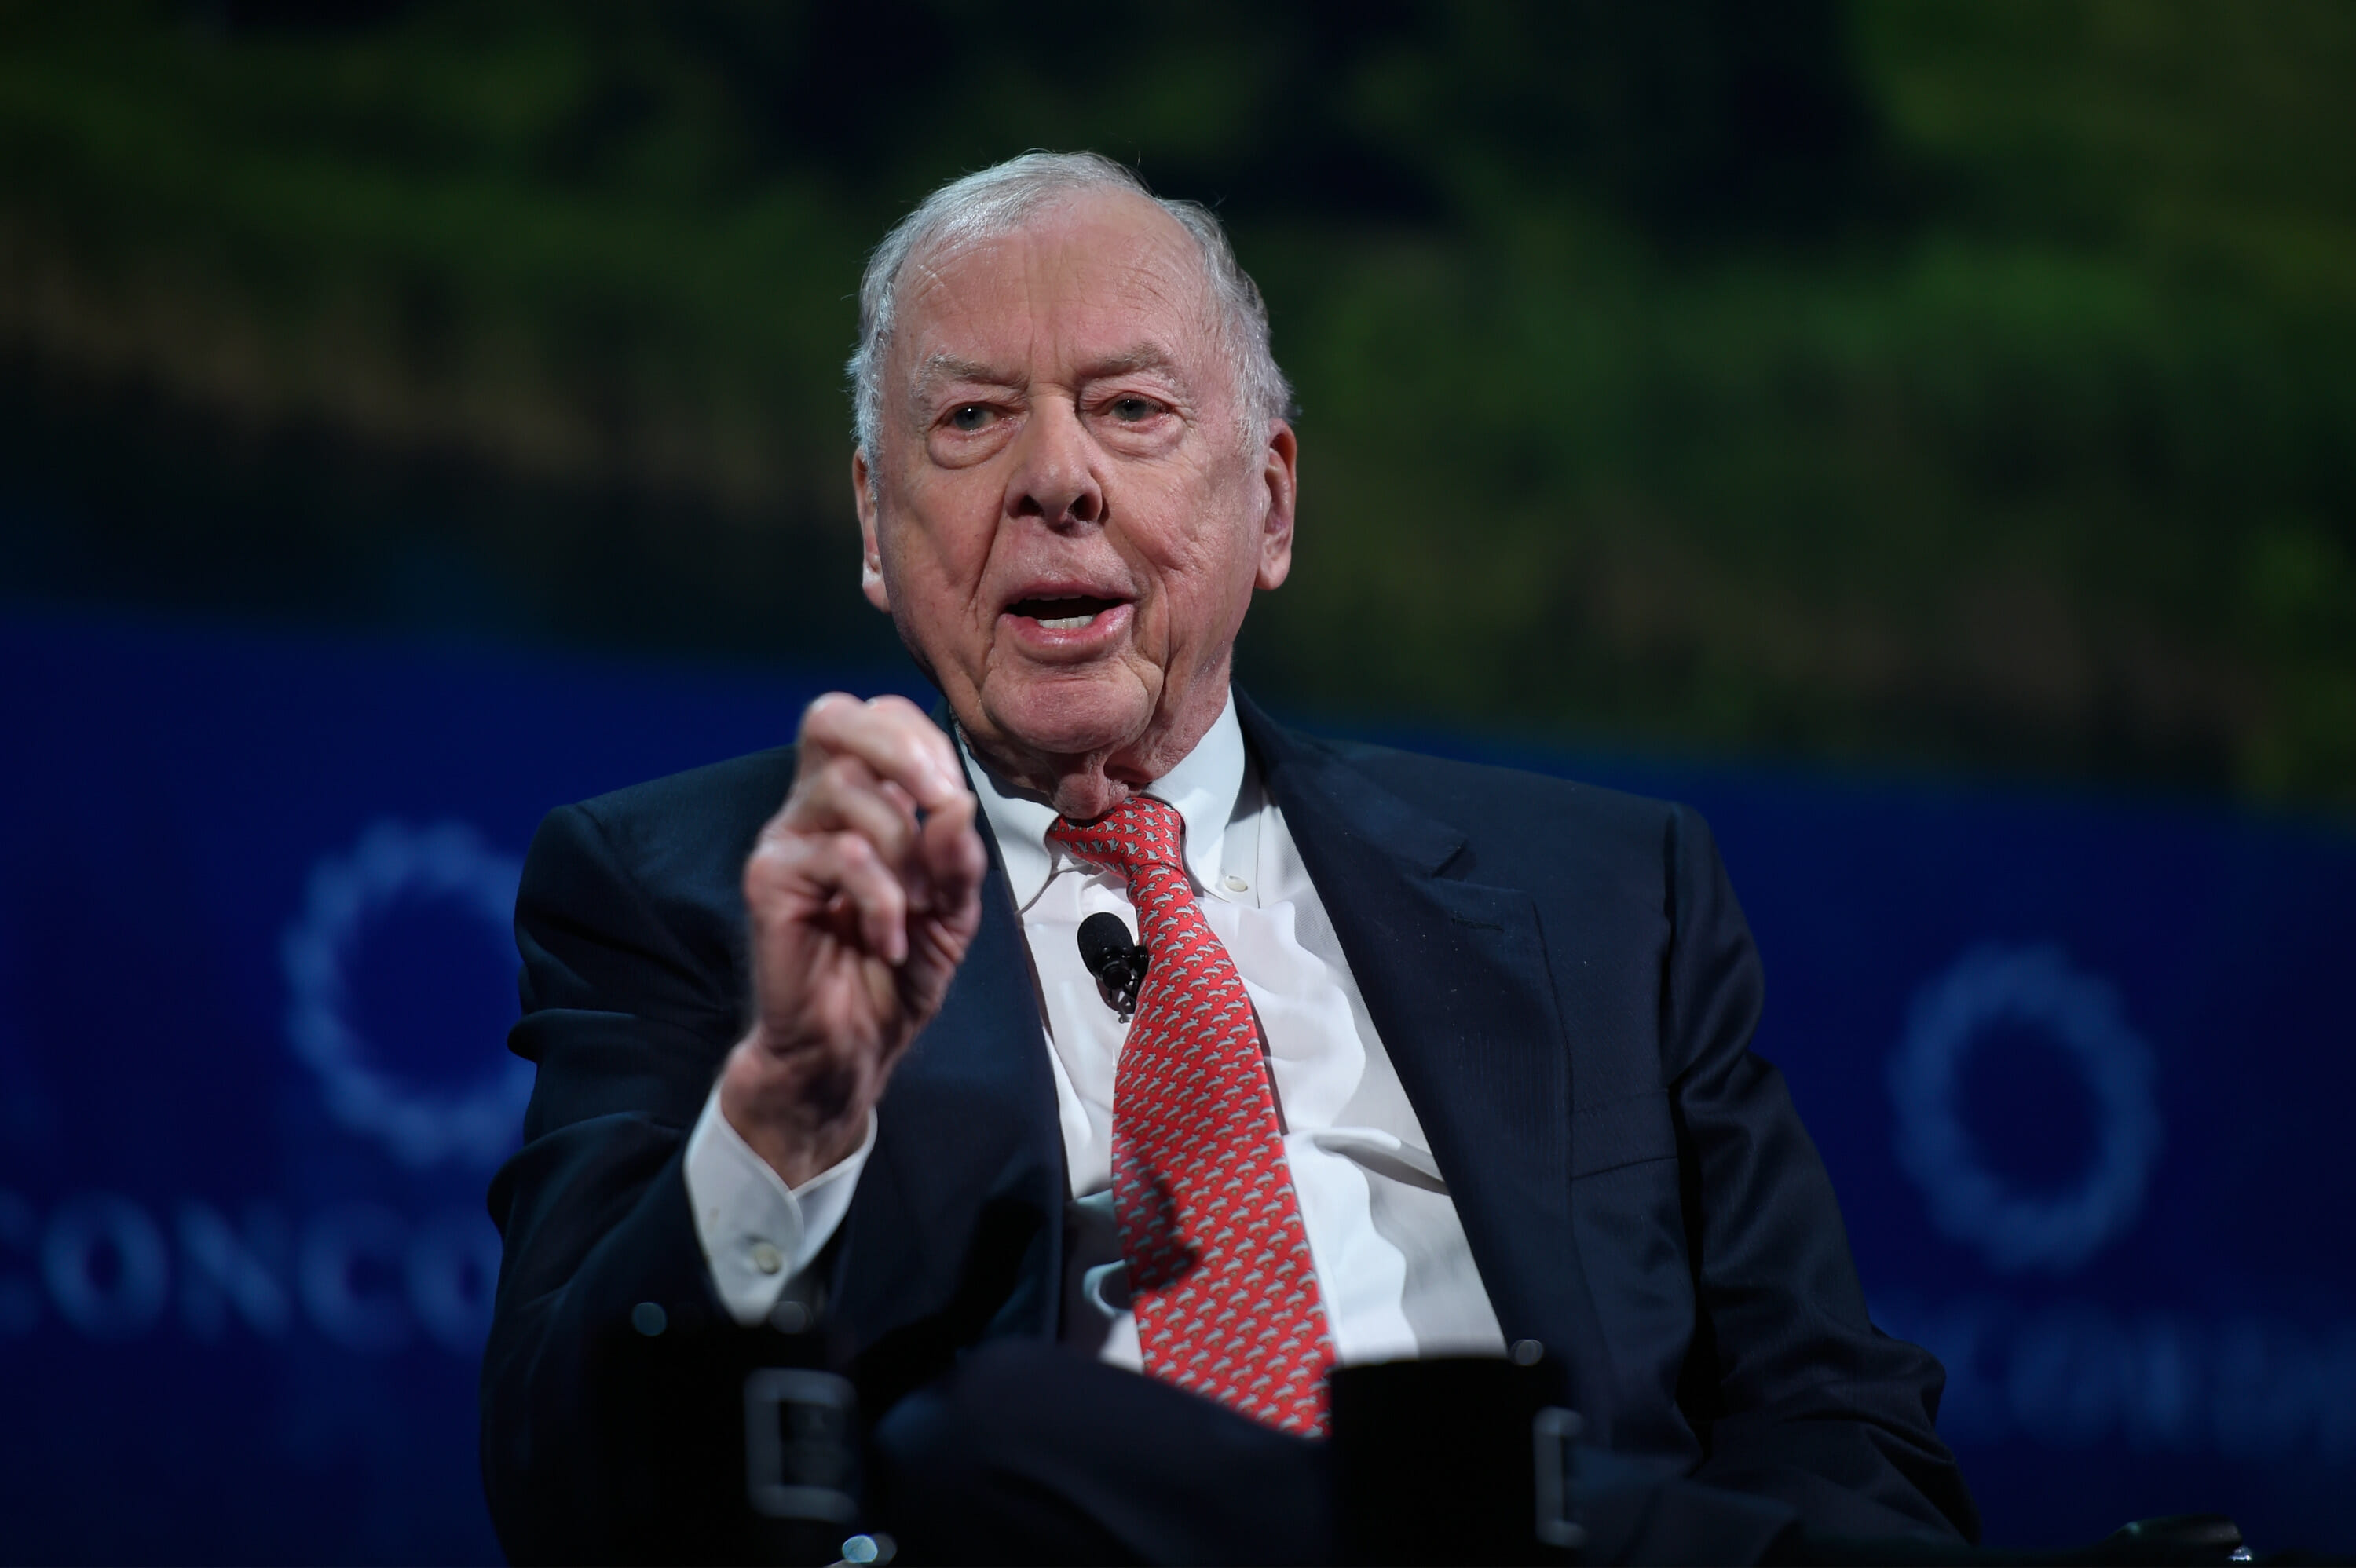 T. Boone Pickens, the founder and chairman of BP Capital Management, speaks at the 2016 Concordia Summit on Sept. 19, 2016, in New York City.